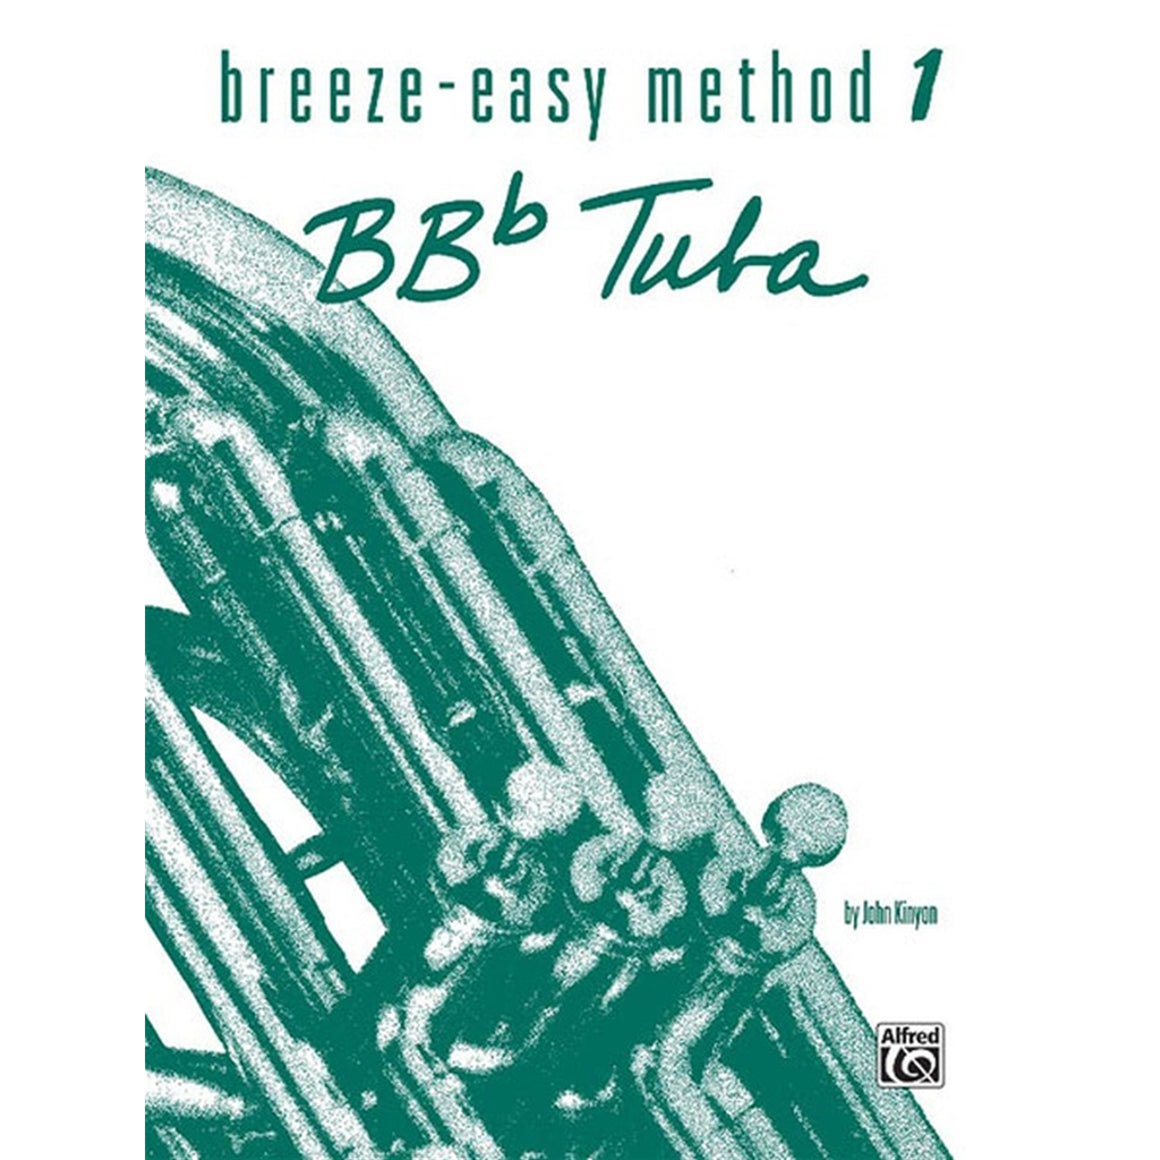 ALFRED 00BE0021 Breeze-Easy Method for Bb-Flat Tuba, Book I